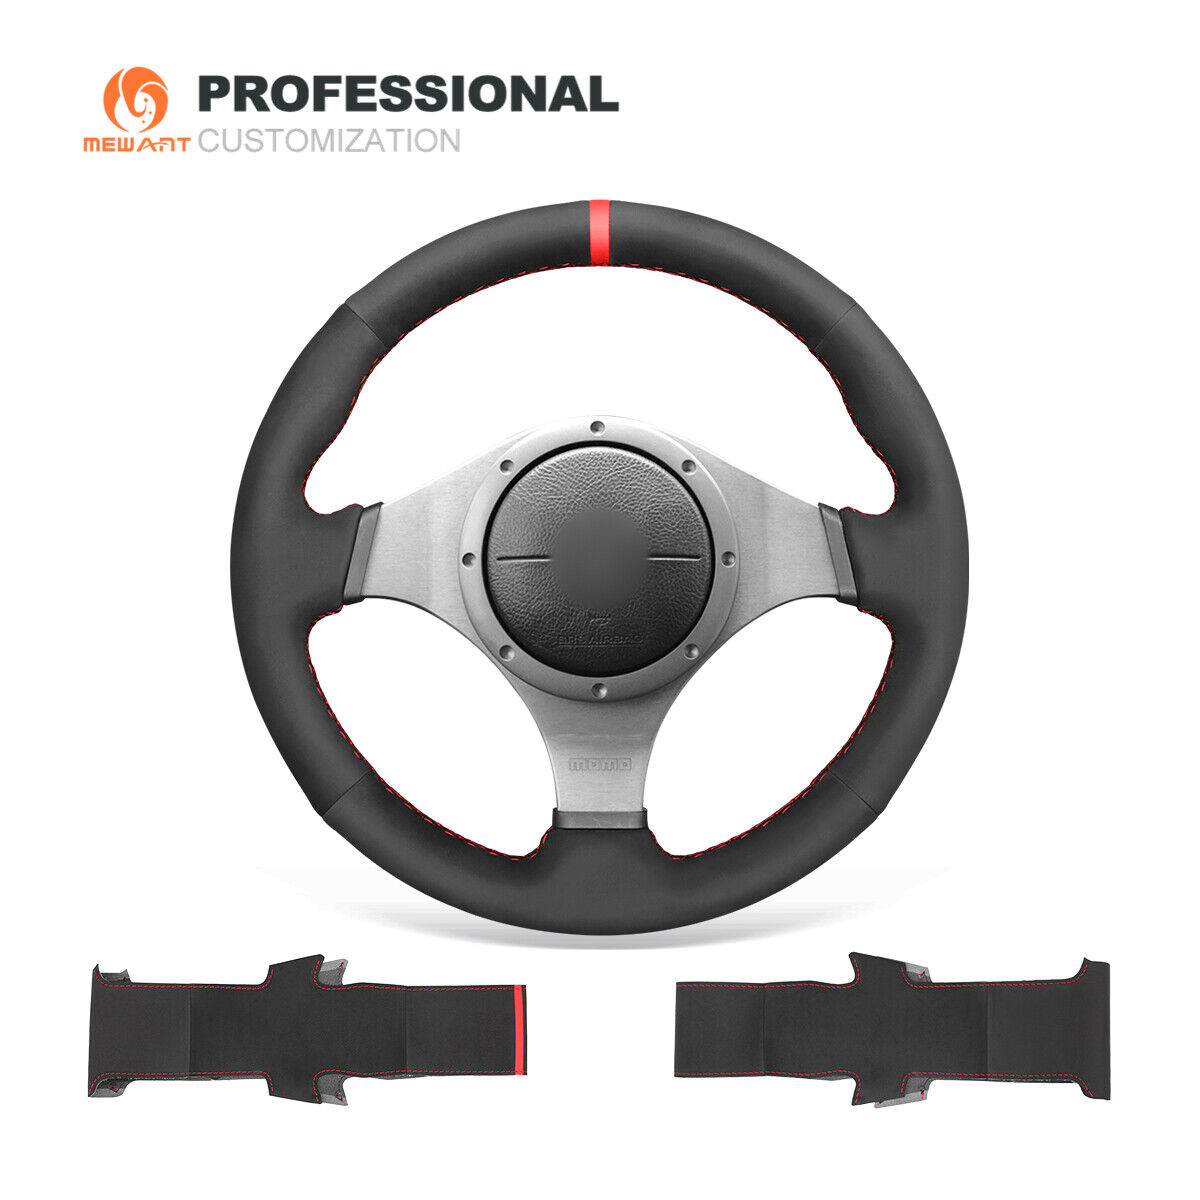 Synthetic Suede Car Steering Wheel Cover for Mitsubishi Lancer Evo 9 IX 8 VIII 